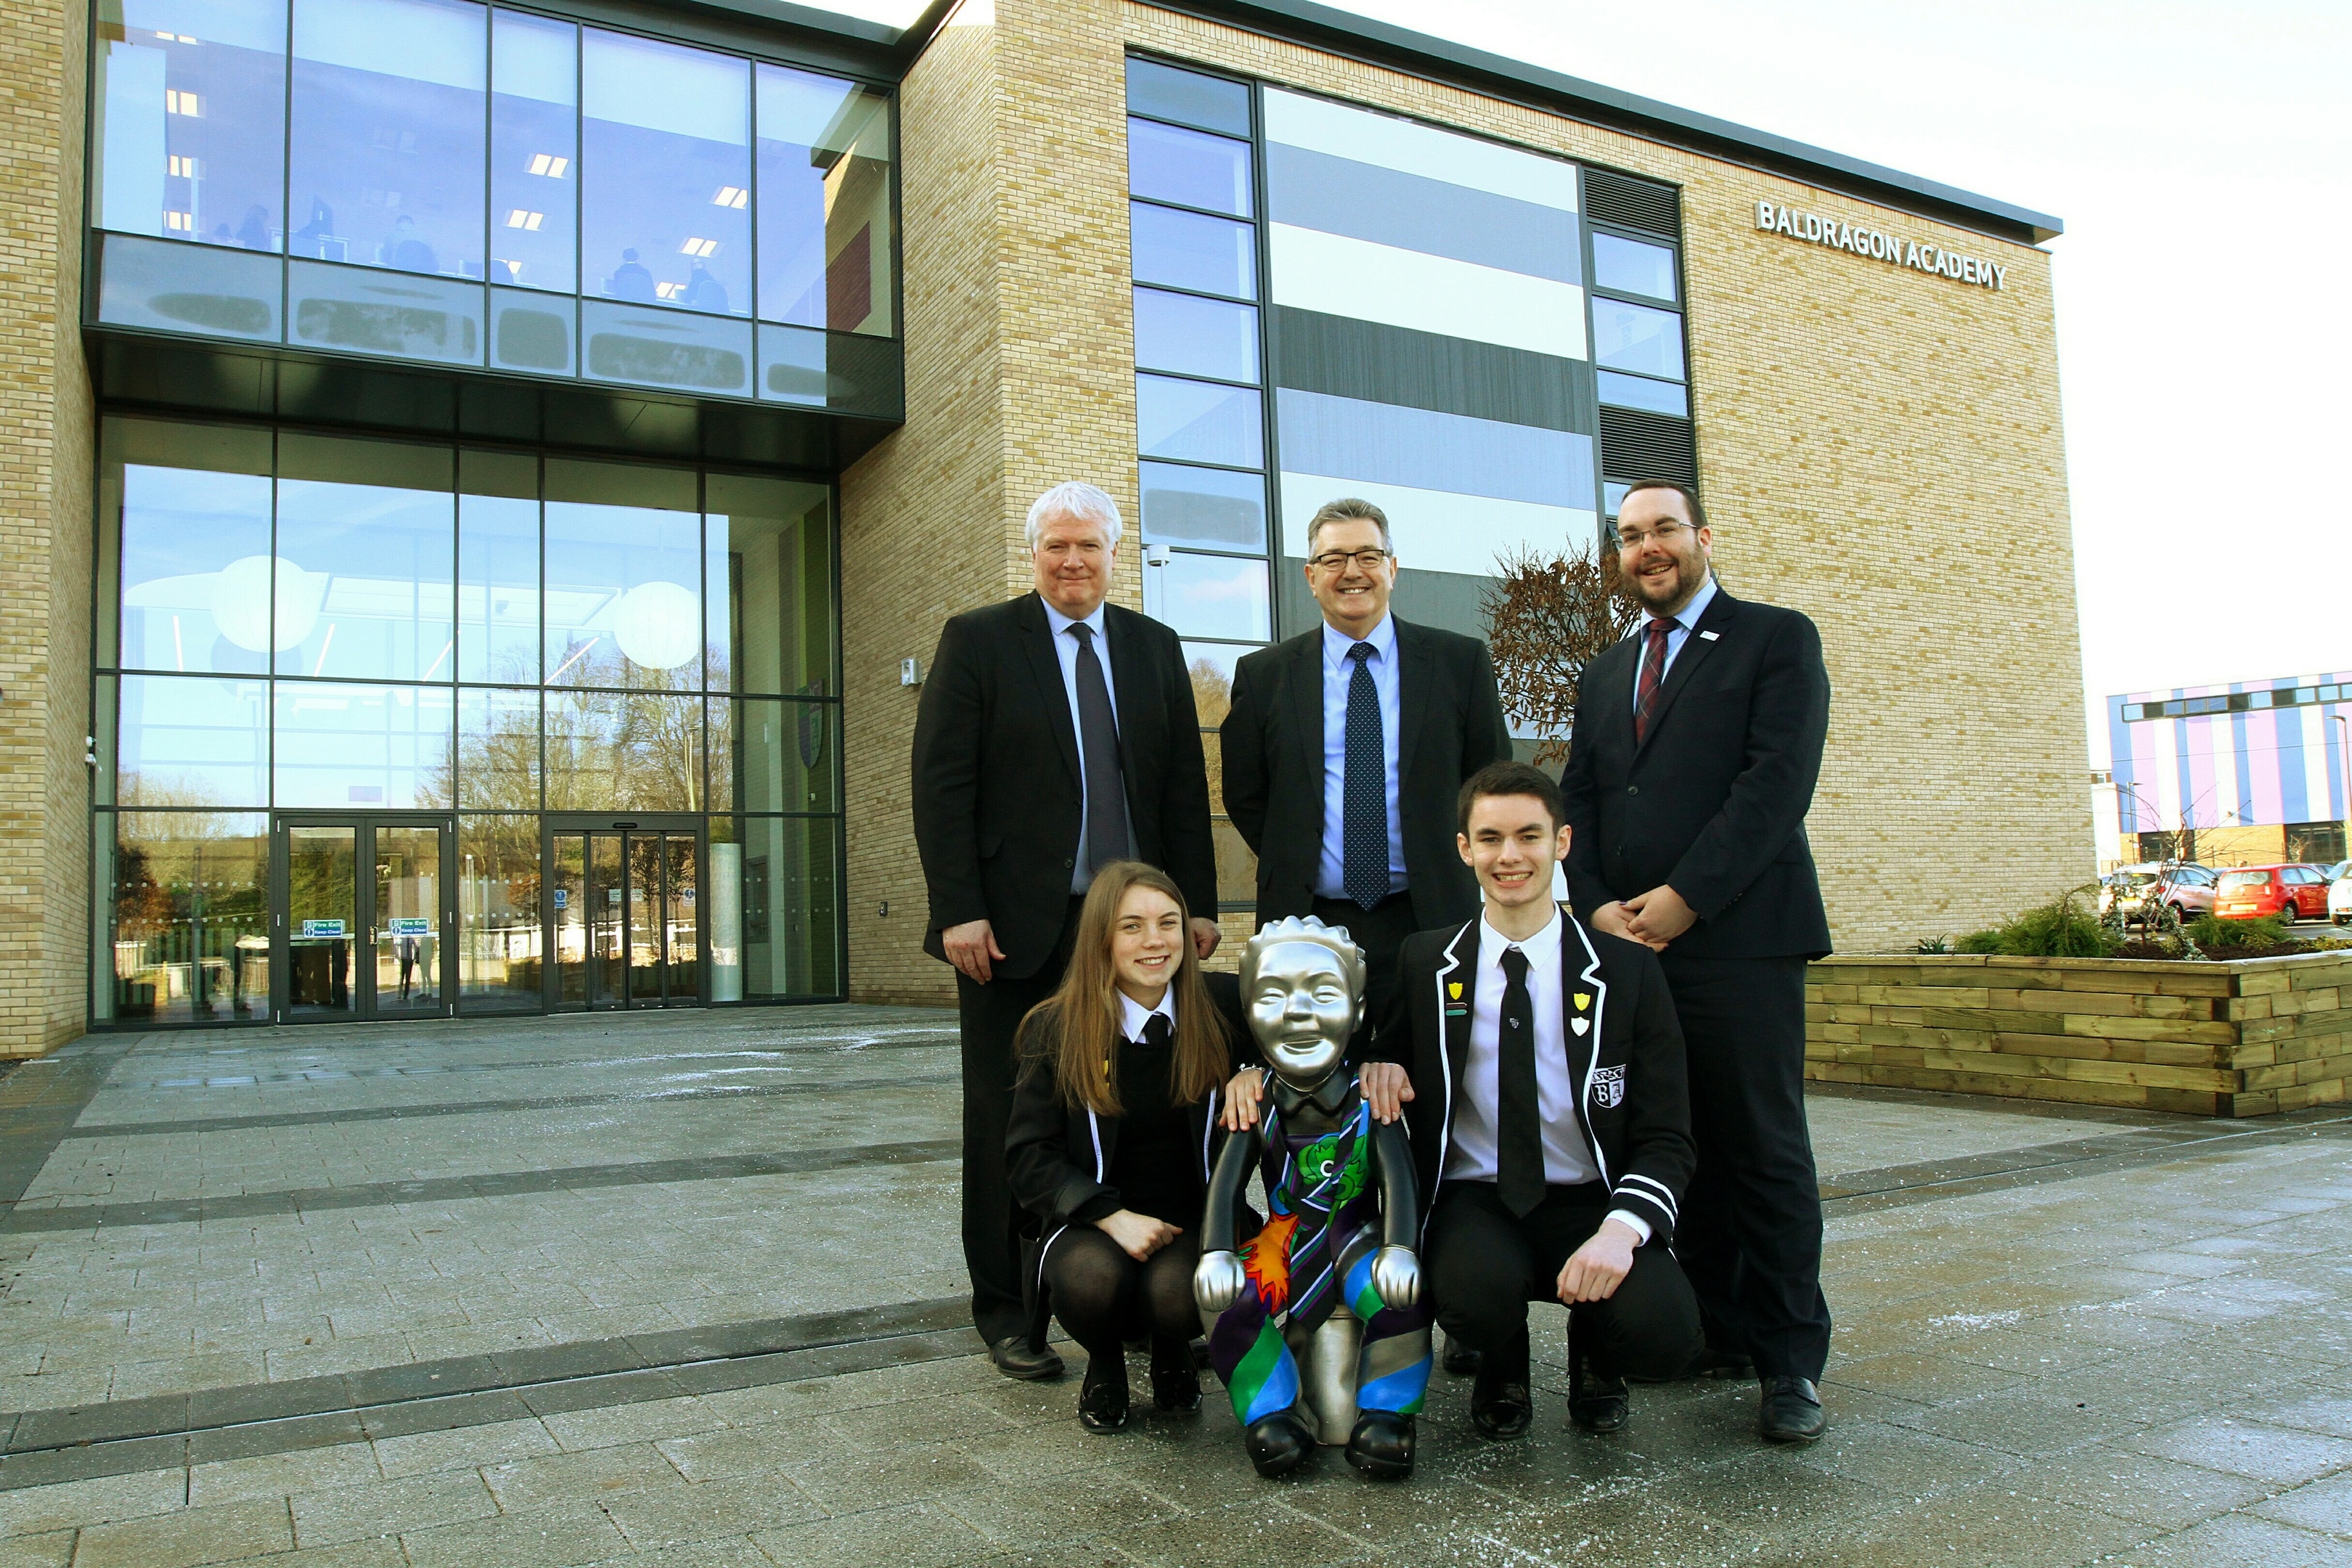 School captains Alix Barclay, left, and Scott Oswald with, from left, Paul Glancy, Kenny Hearn and Gregor Murray at the first day of the new Baldragon Academy.